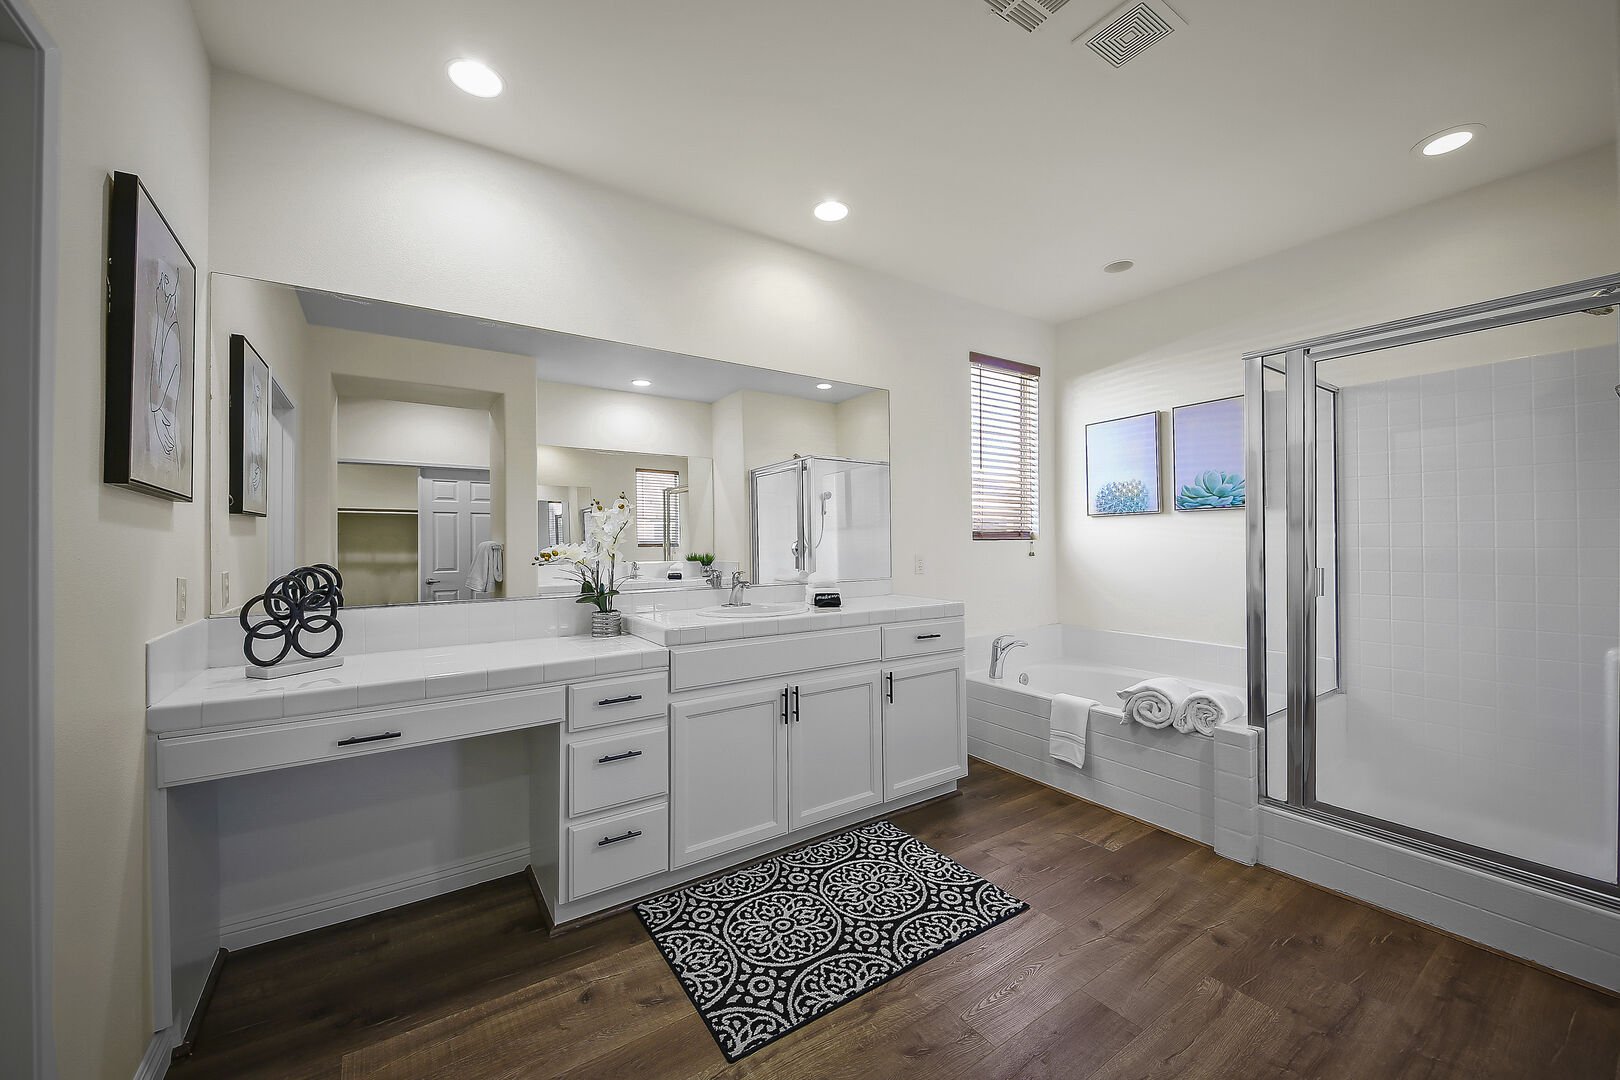 The private, en suite bathroom features a soaking tub, tile shower and his and her vanity sinks and a makeup counter.